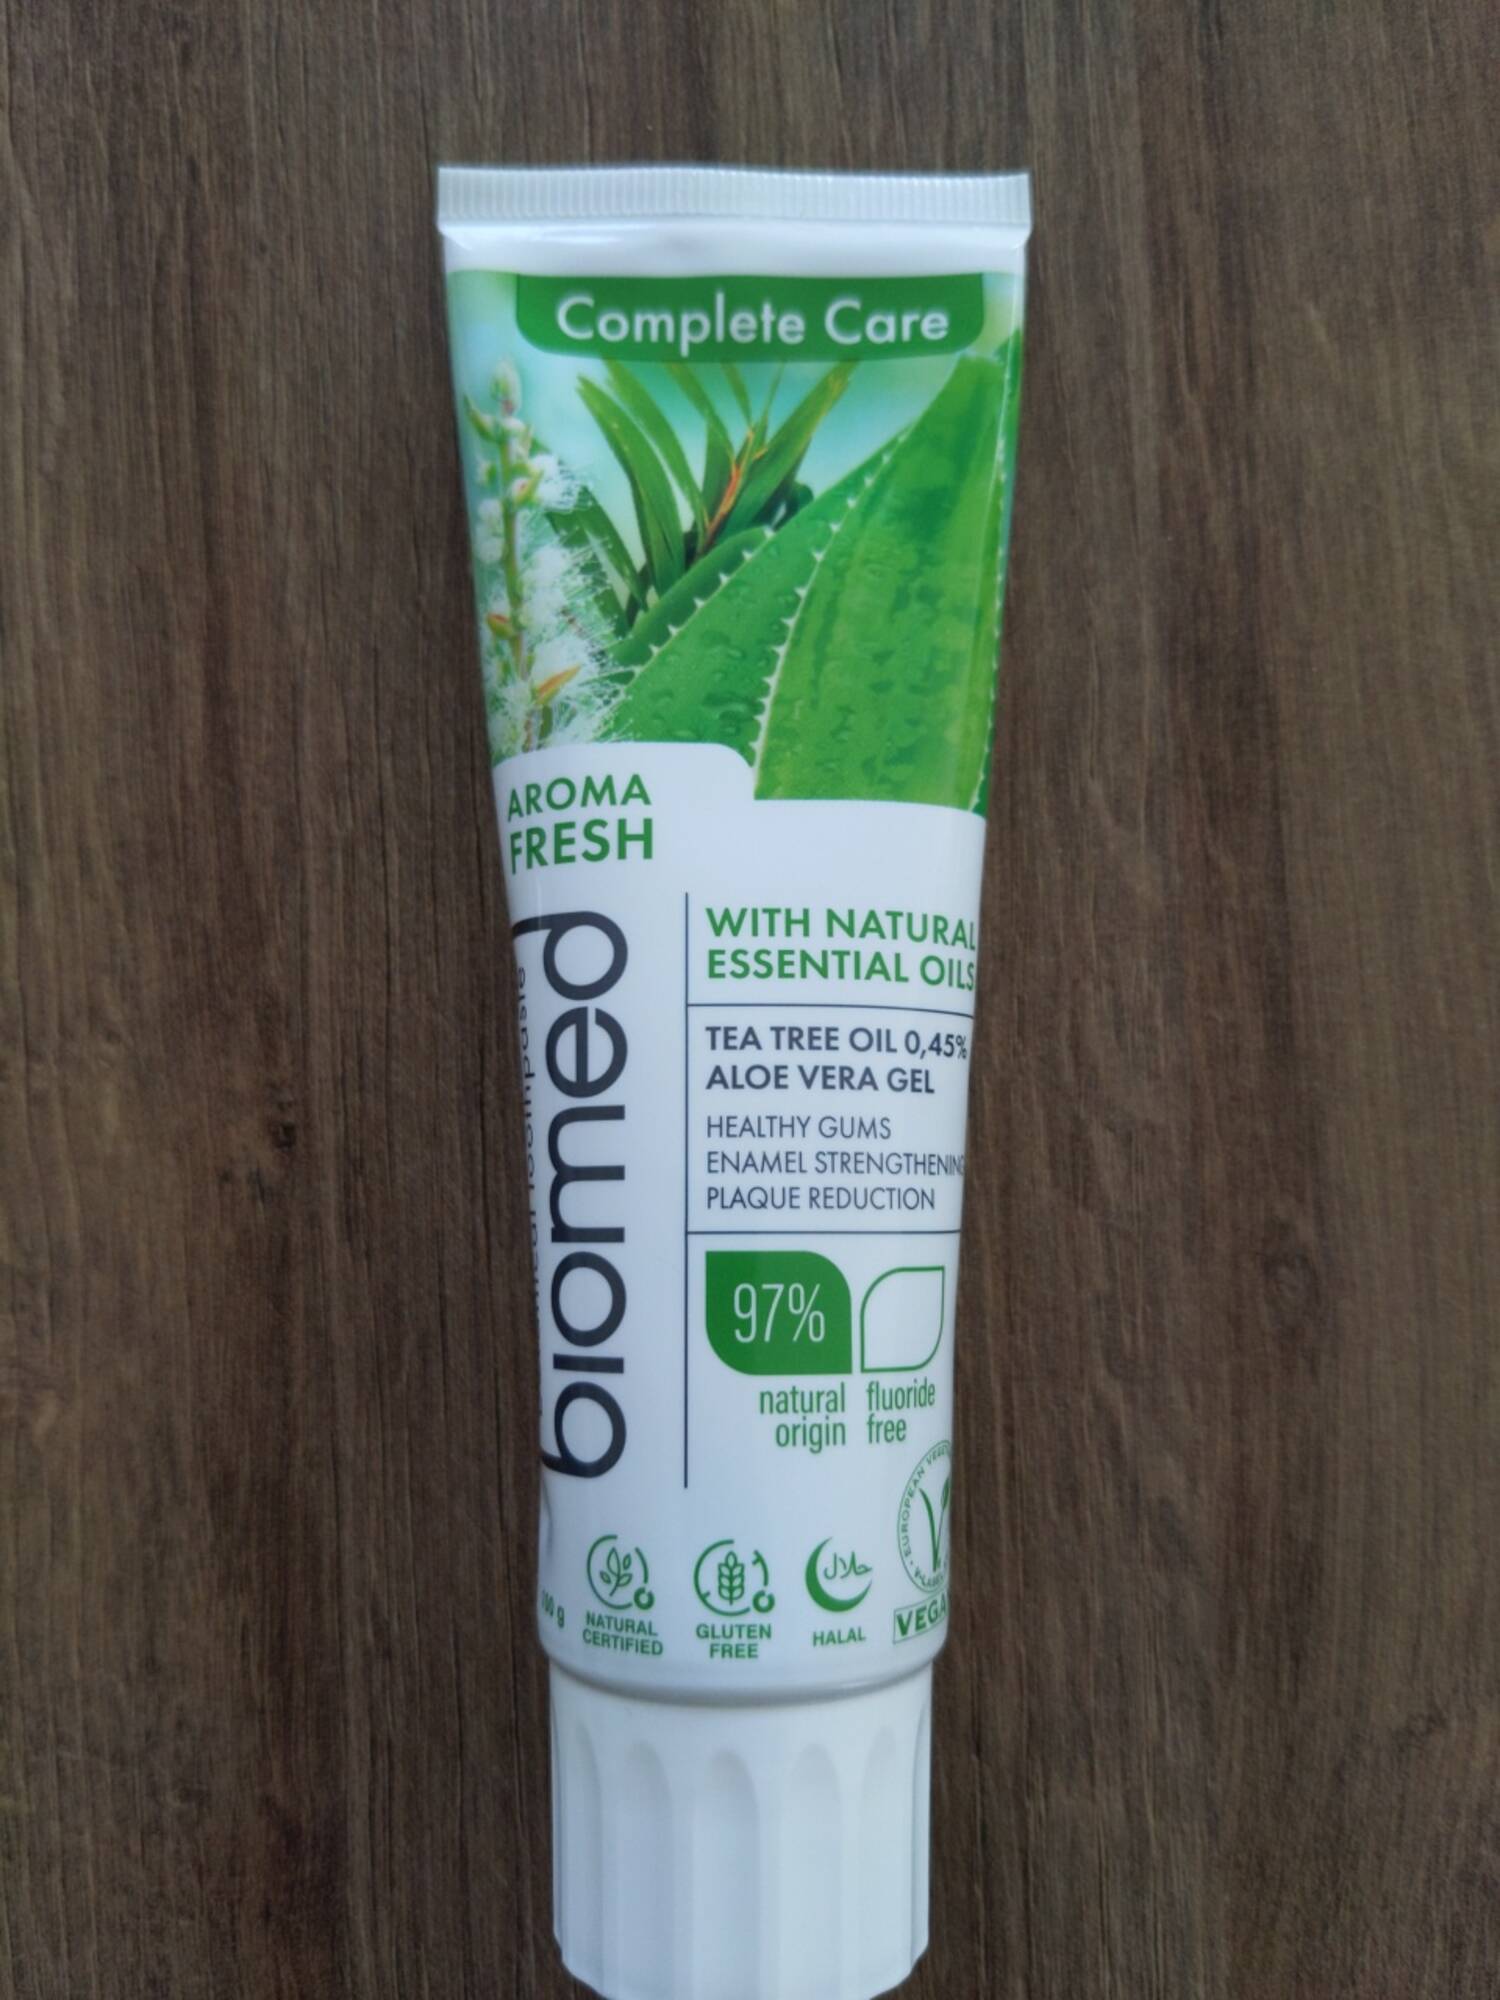 BIOMED - Complete care aroma fresh - Toothpaste